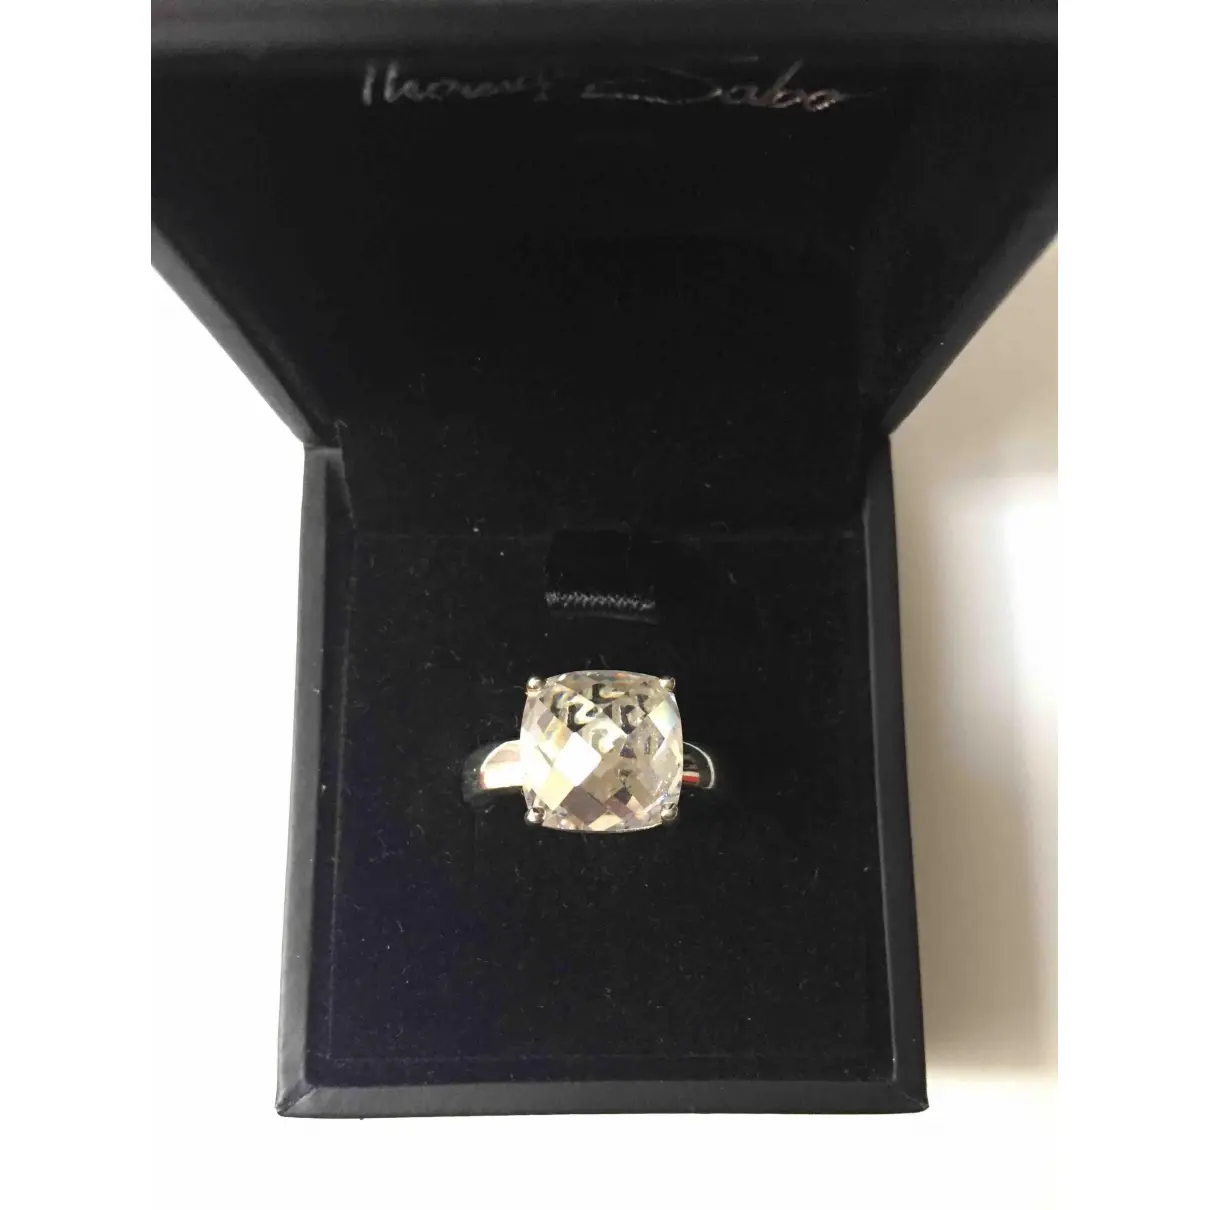 Thomas Sabo Silver ring for sale